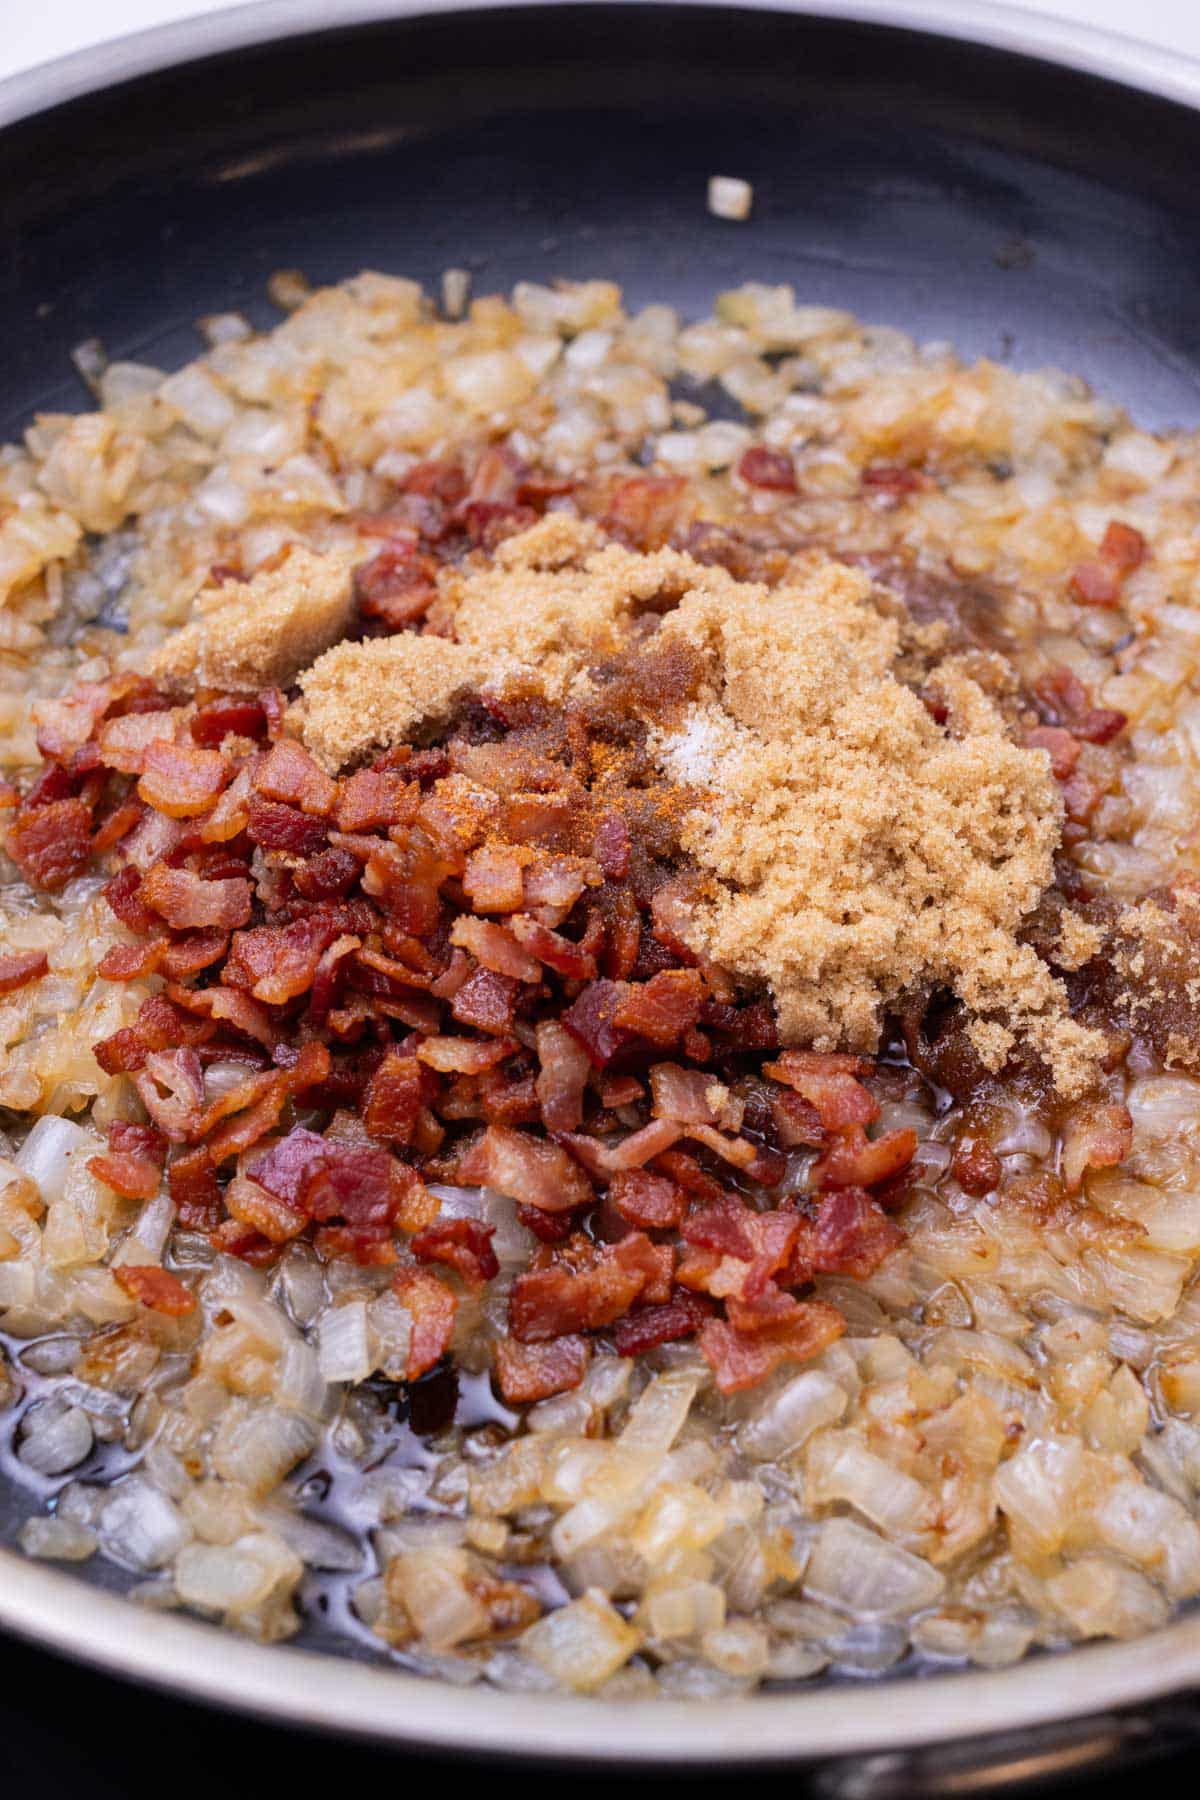 Bacon, brown sugar, and seasonings are added to the onions to make jam.